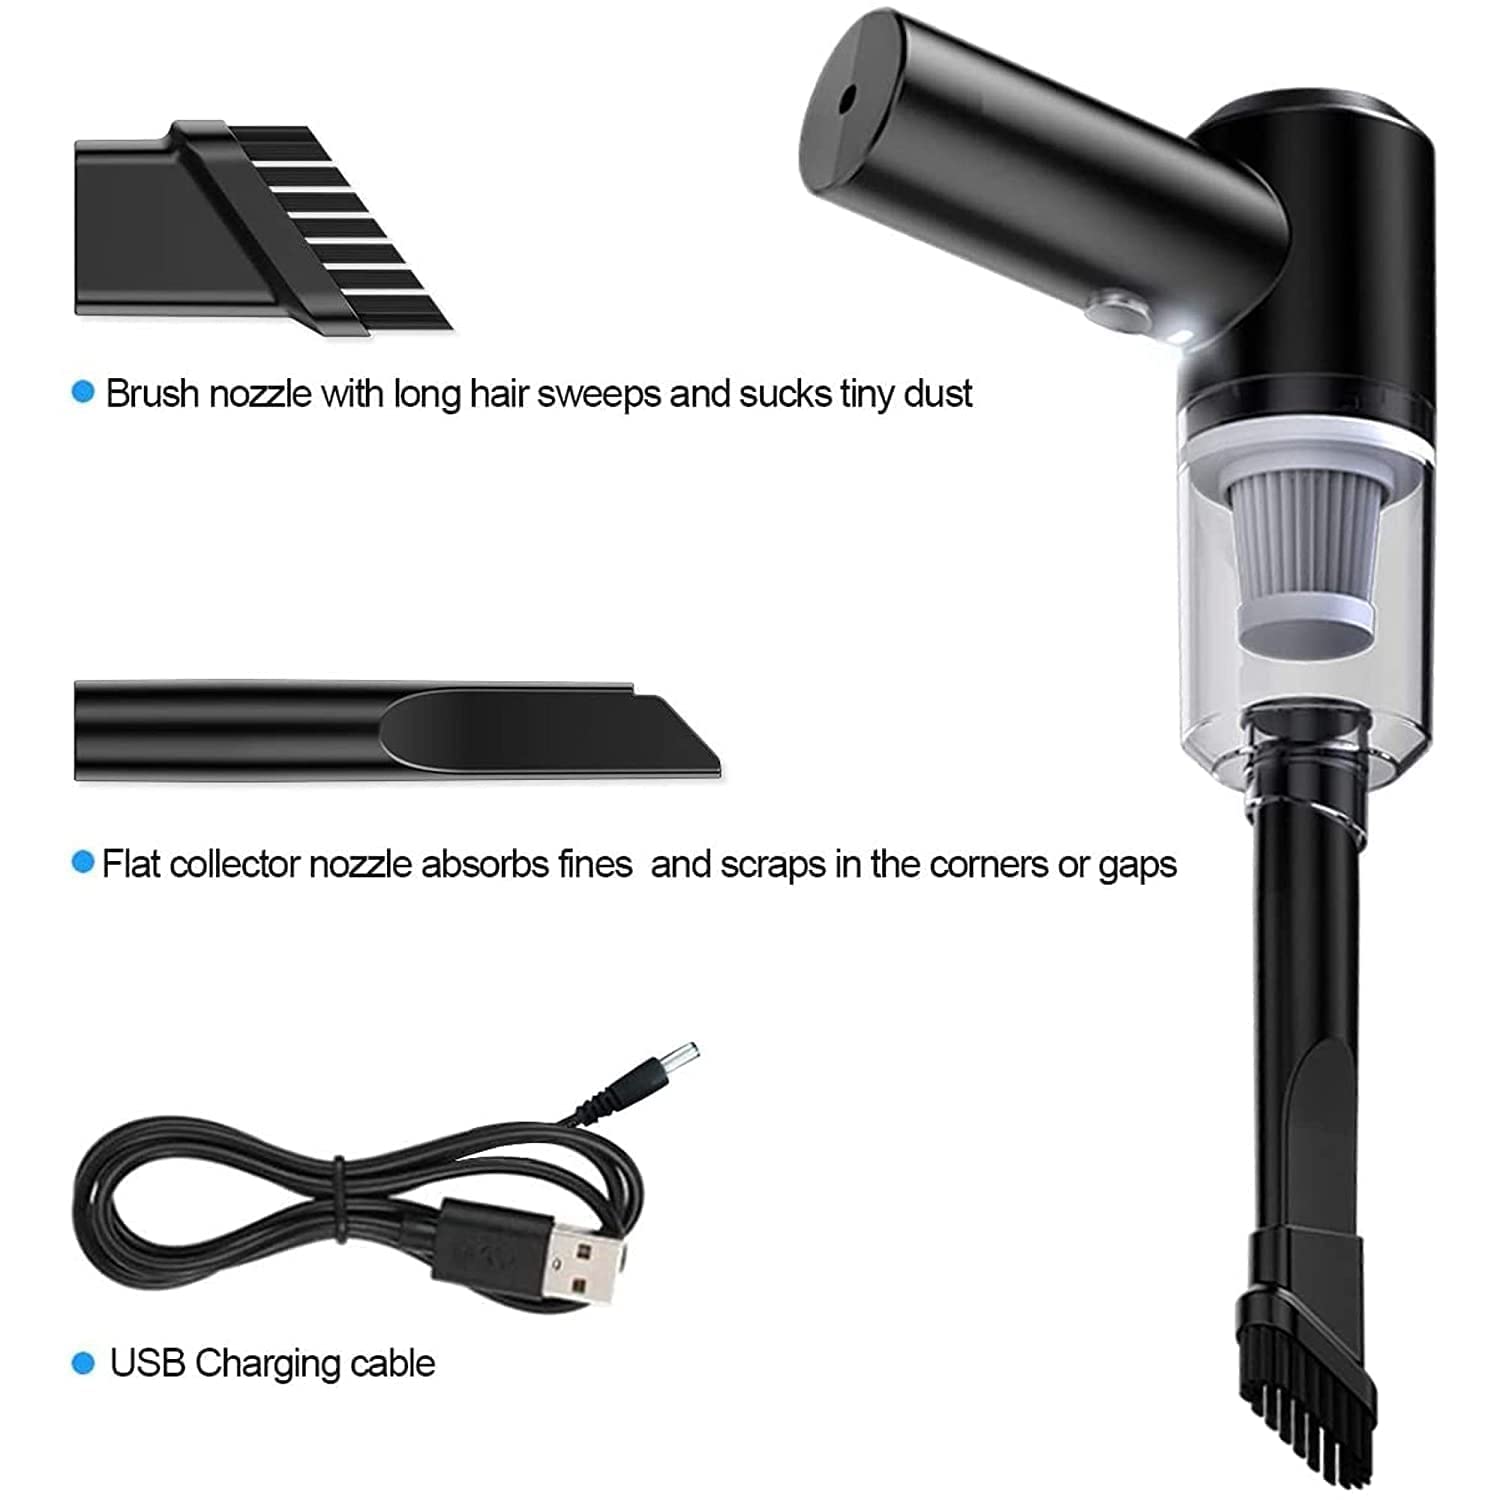 Portable High Power 2 in 1 Car Vacuum Cleaner | USB Rechargeable Wireless Handheld Car Vacuum Cleaner with Built-in LED Light | Wet and Dry Cleaning